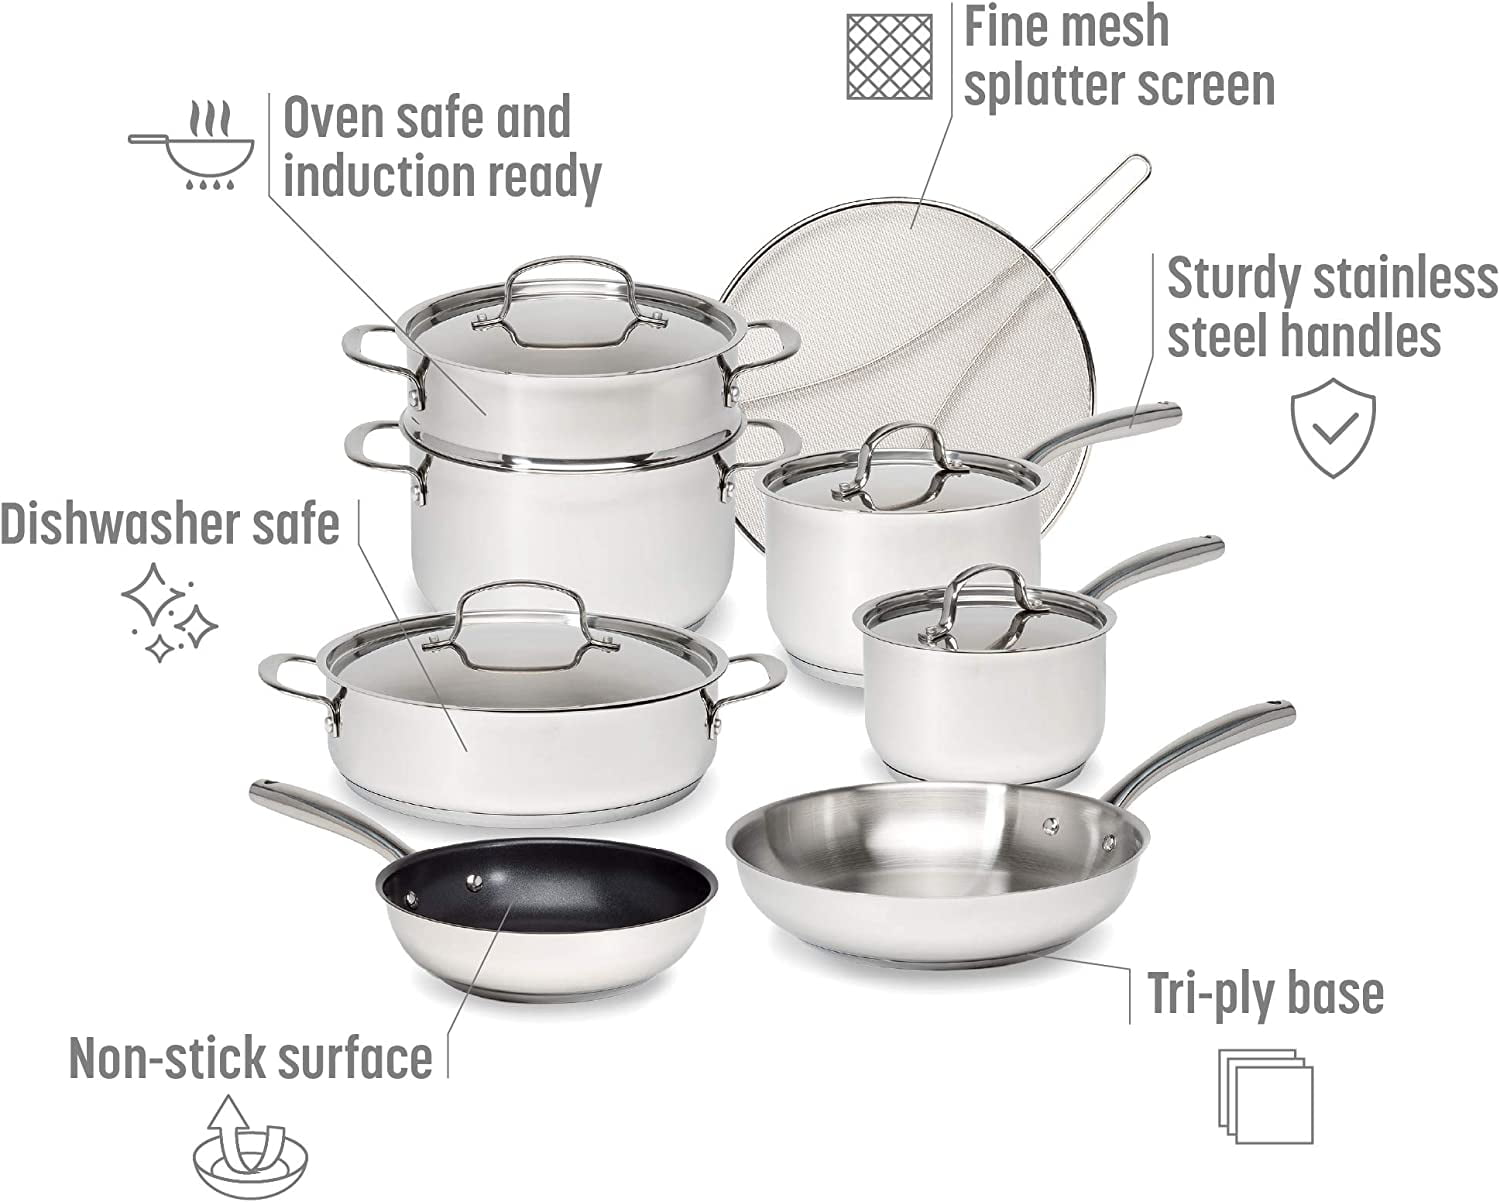 Goodful 12 Piece Cookware Set with Titanium-Reinforced Premium Non-Stick Coating, Dishwasher Safe Pots and Pans, Tempered GLA